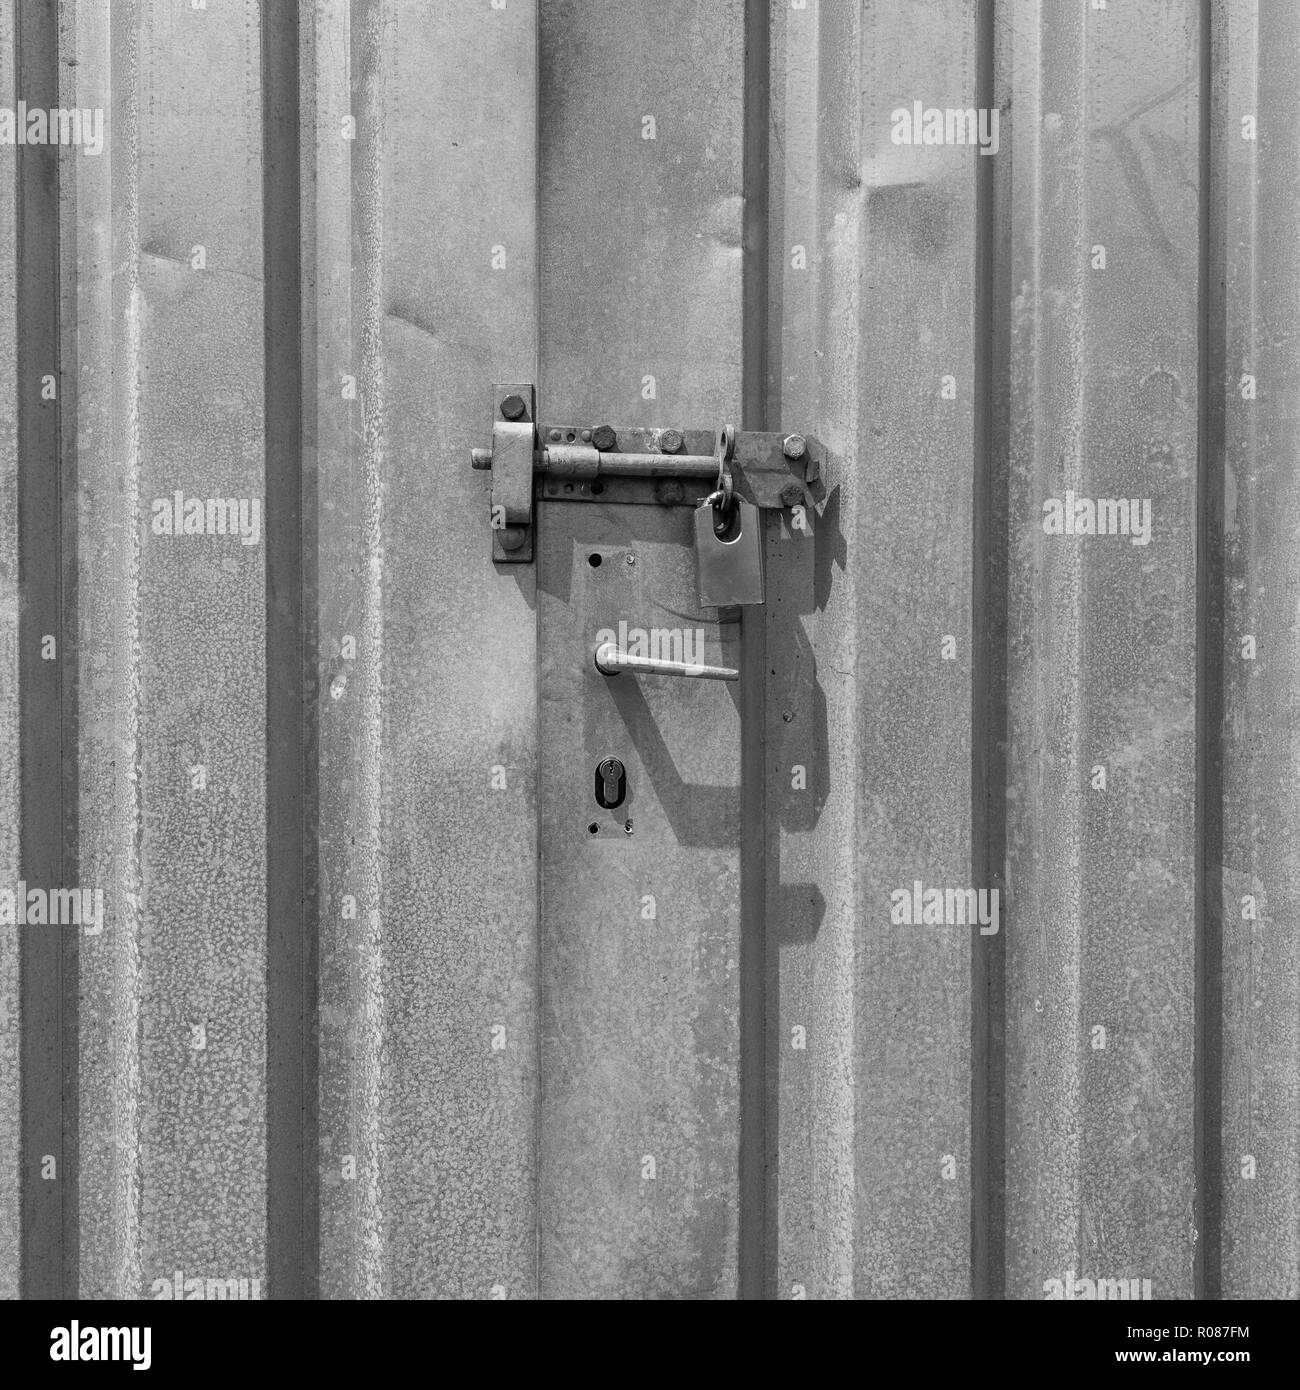 Padlocked doors of lock-up self-storage shipping contained. Metaphor for secure, data security, virus protection, lockdown etc. B&W version of R086F0. Stock Photo